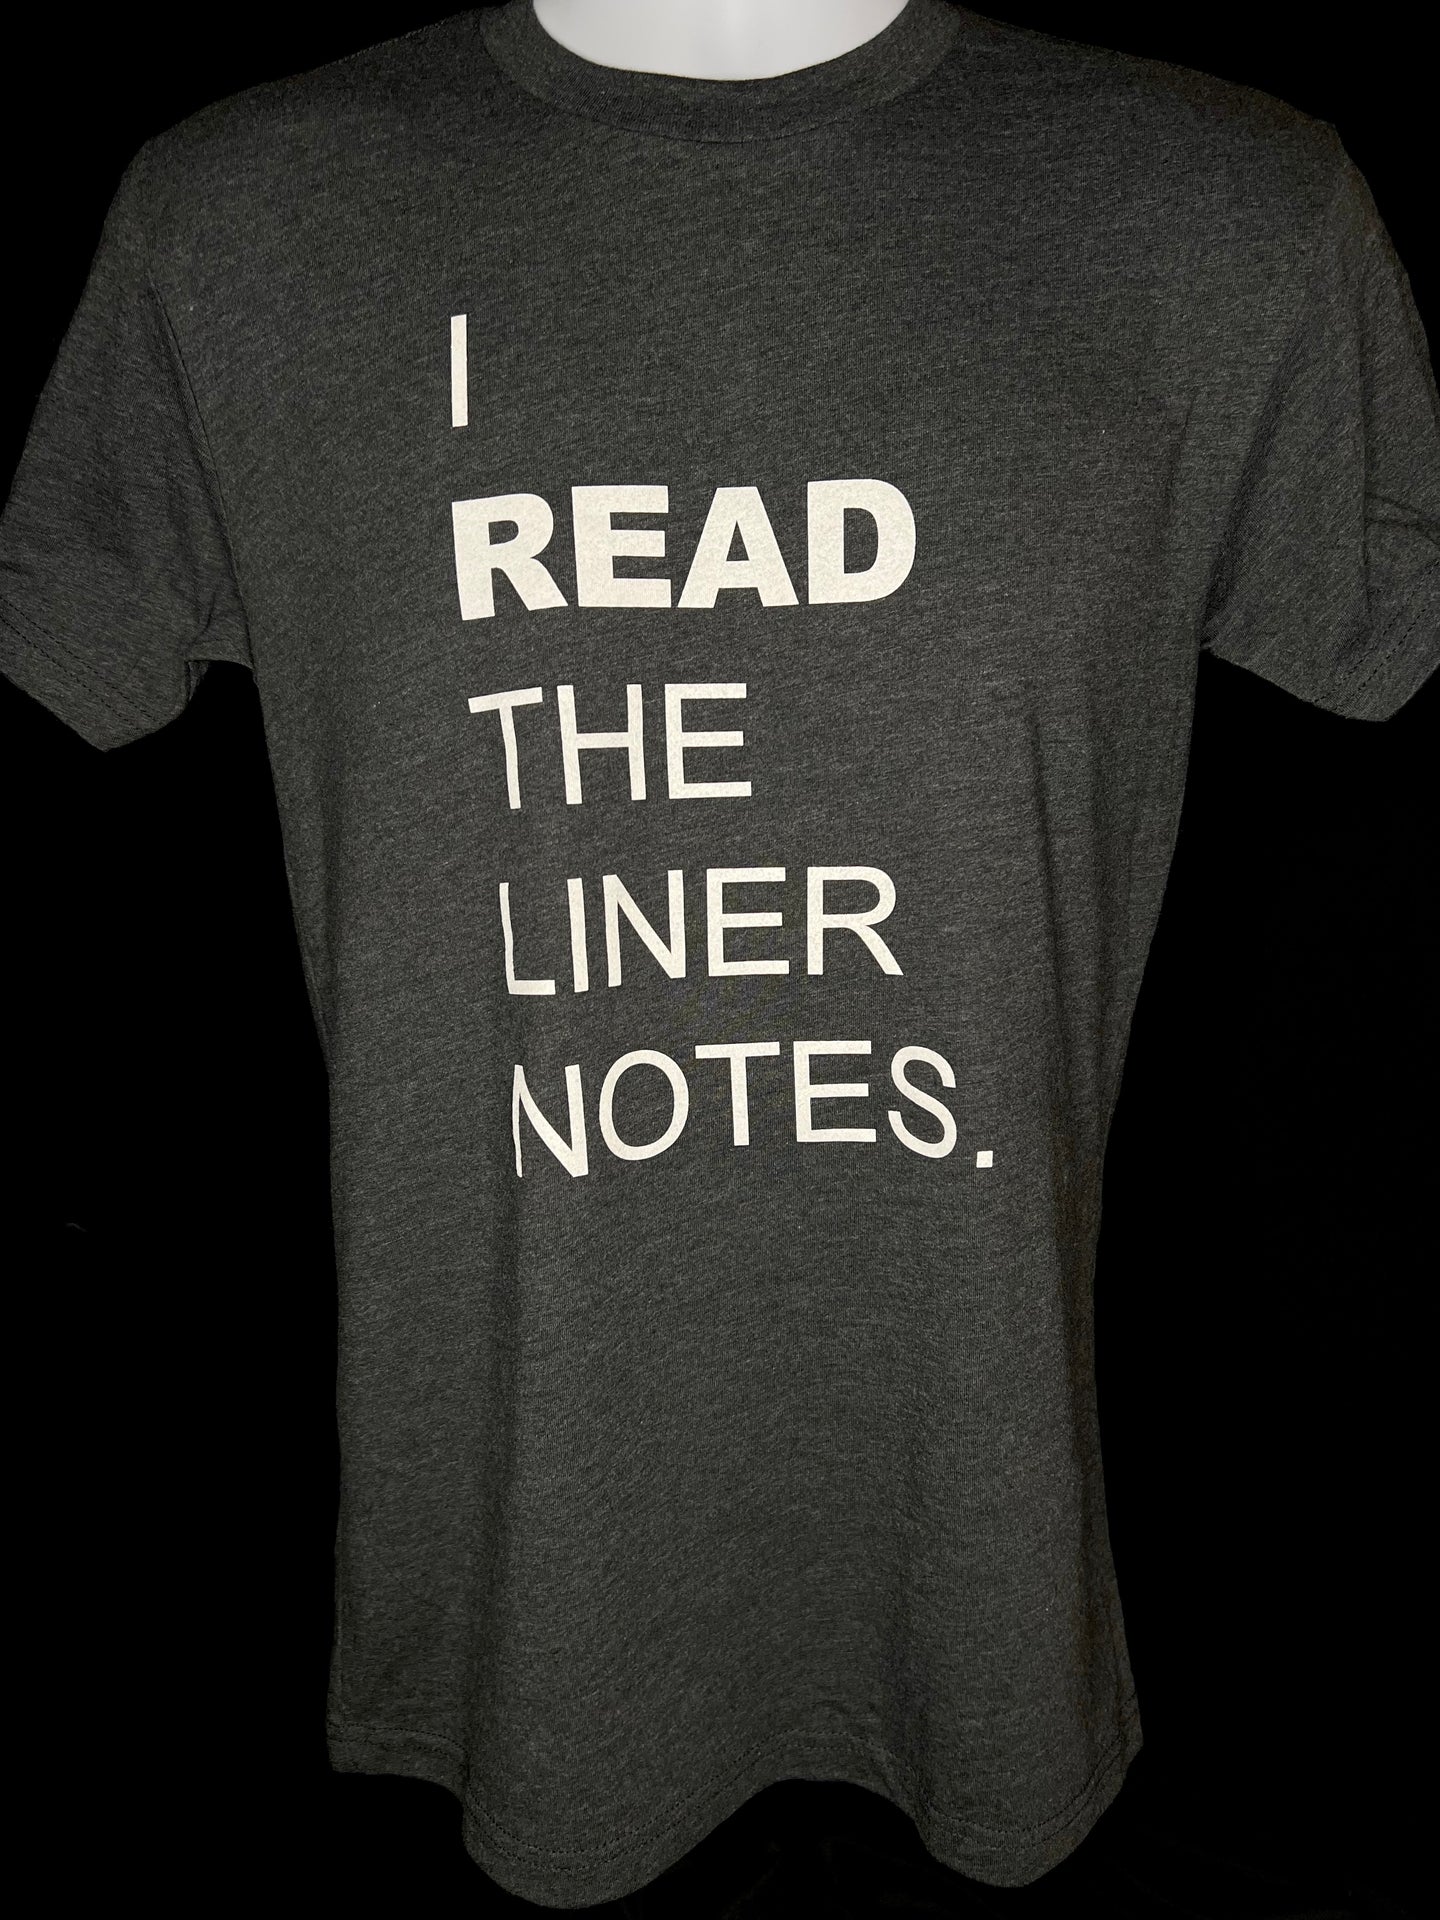 I Read The Liner Notes.® - Charcoal T-Shirt (Unisex)